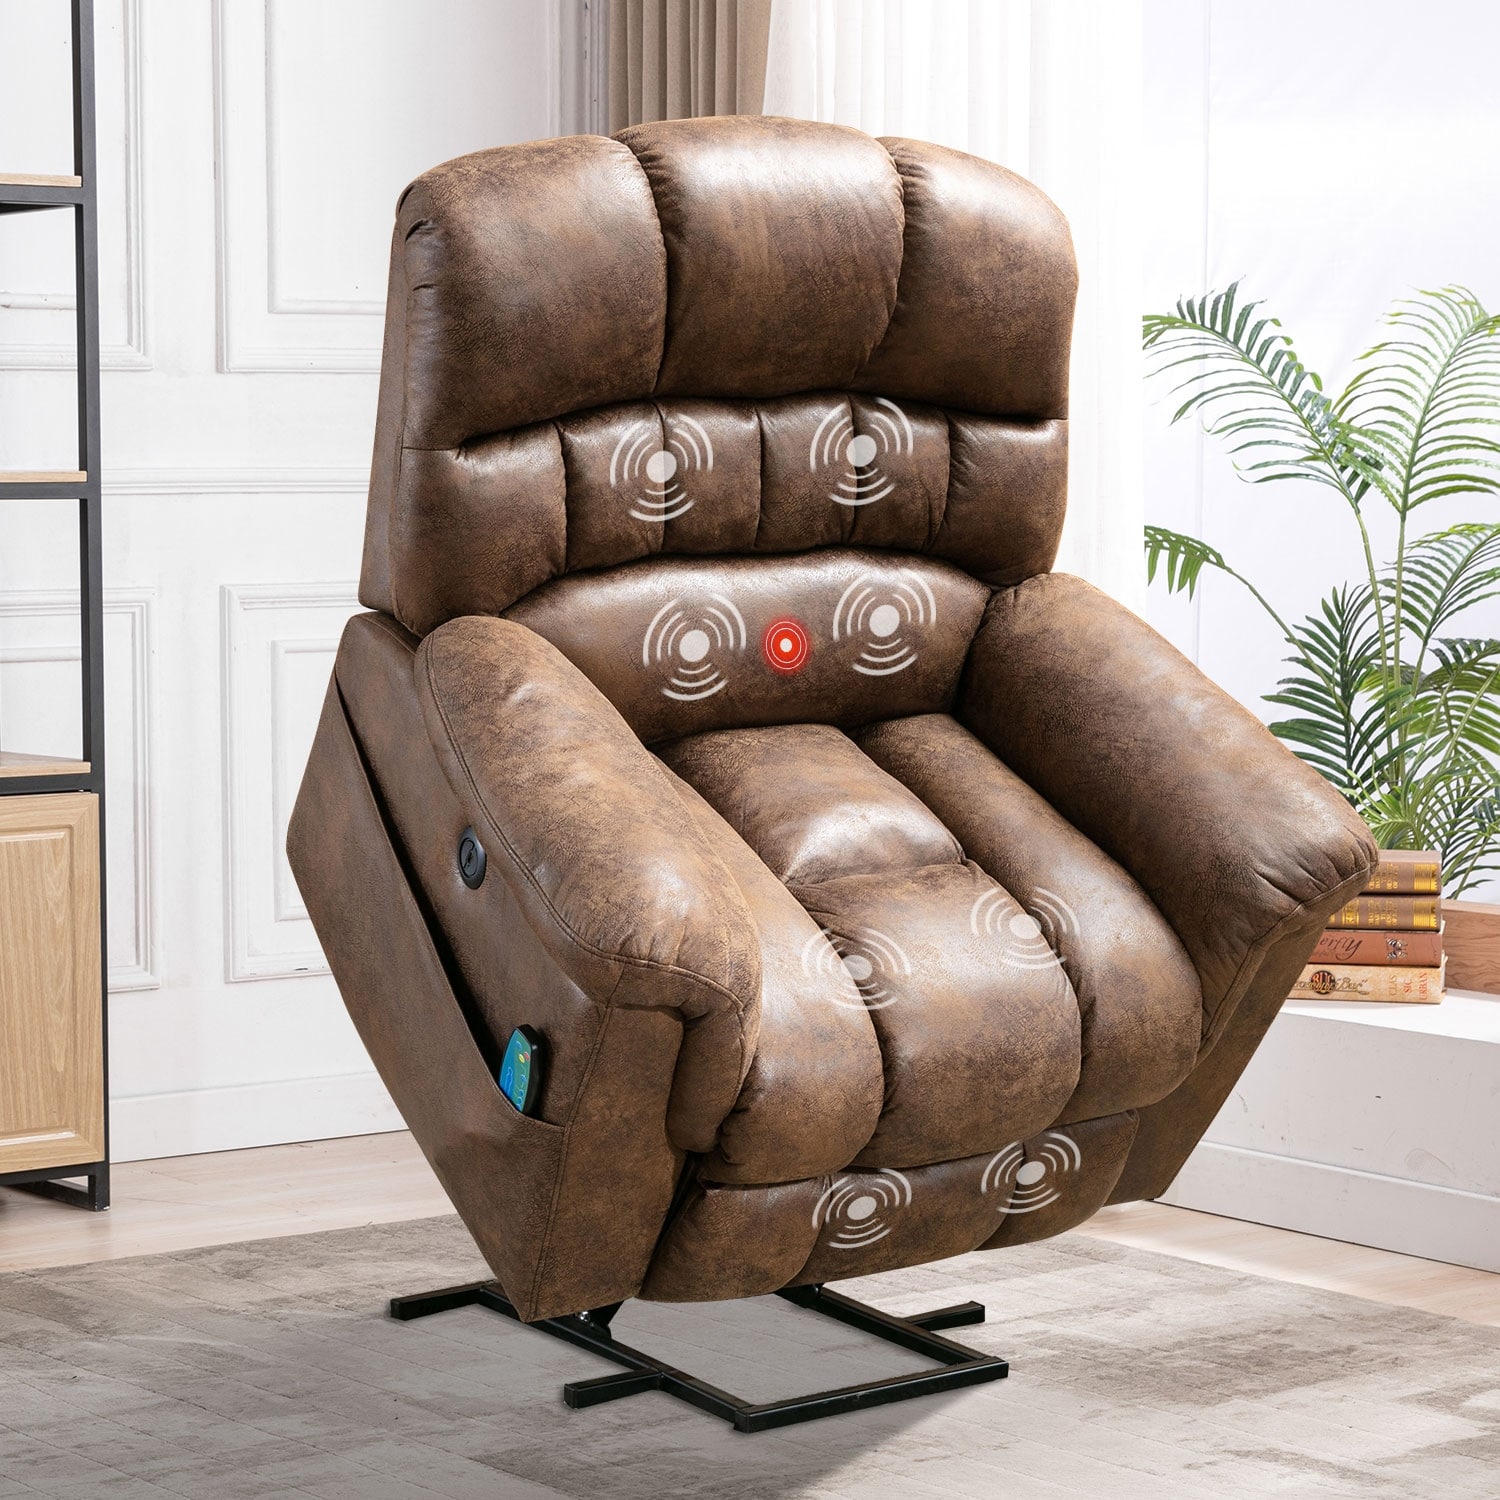 https://ak1.ostkcdn.com/images/products/is/images/direct/48831d1a5823aa86717beaab1317ec8f21b510fd/Super-Soft-Microsuede-Power-Lift-Recliner-Sofa-with-Massage-Chair.jpg